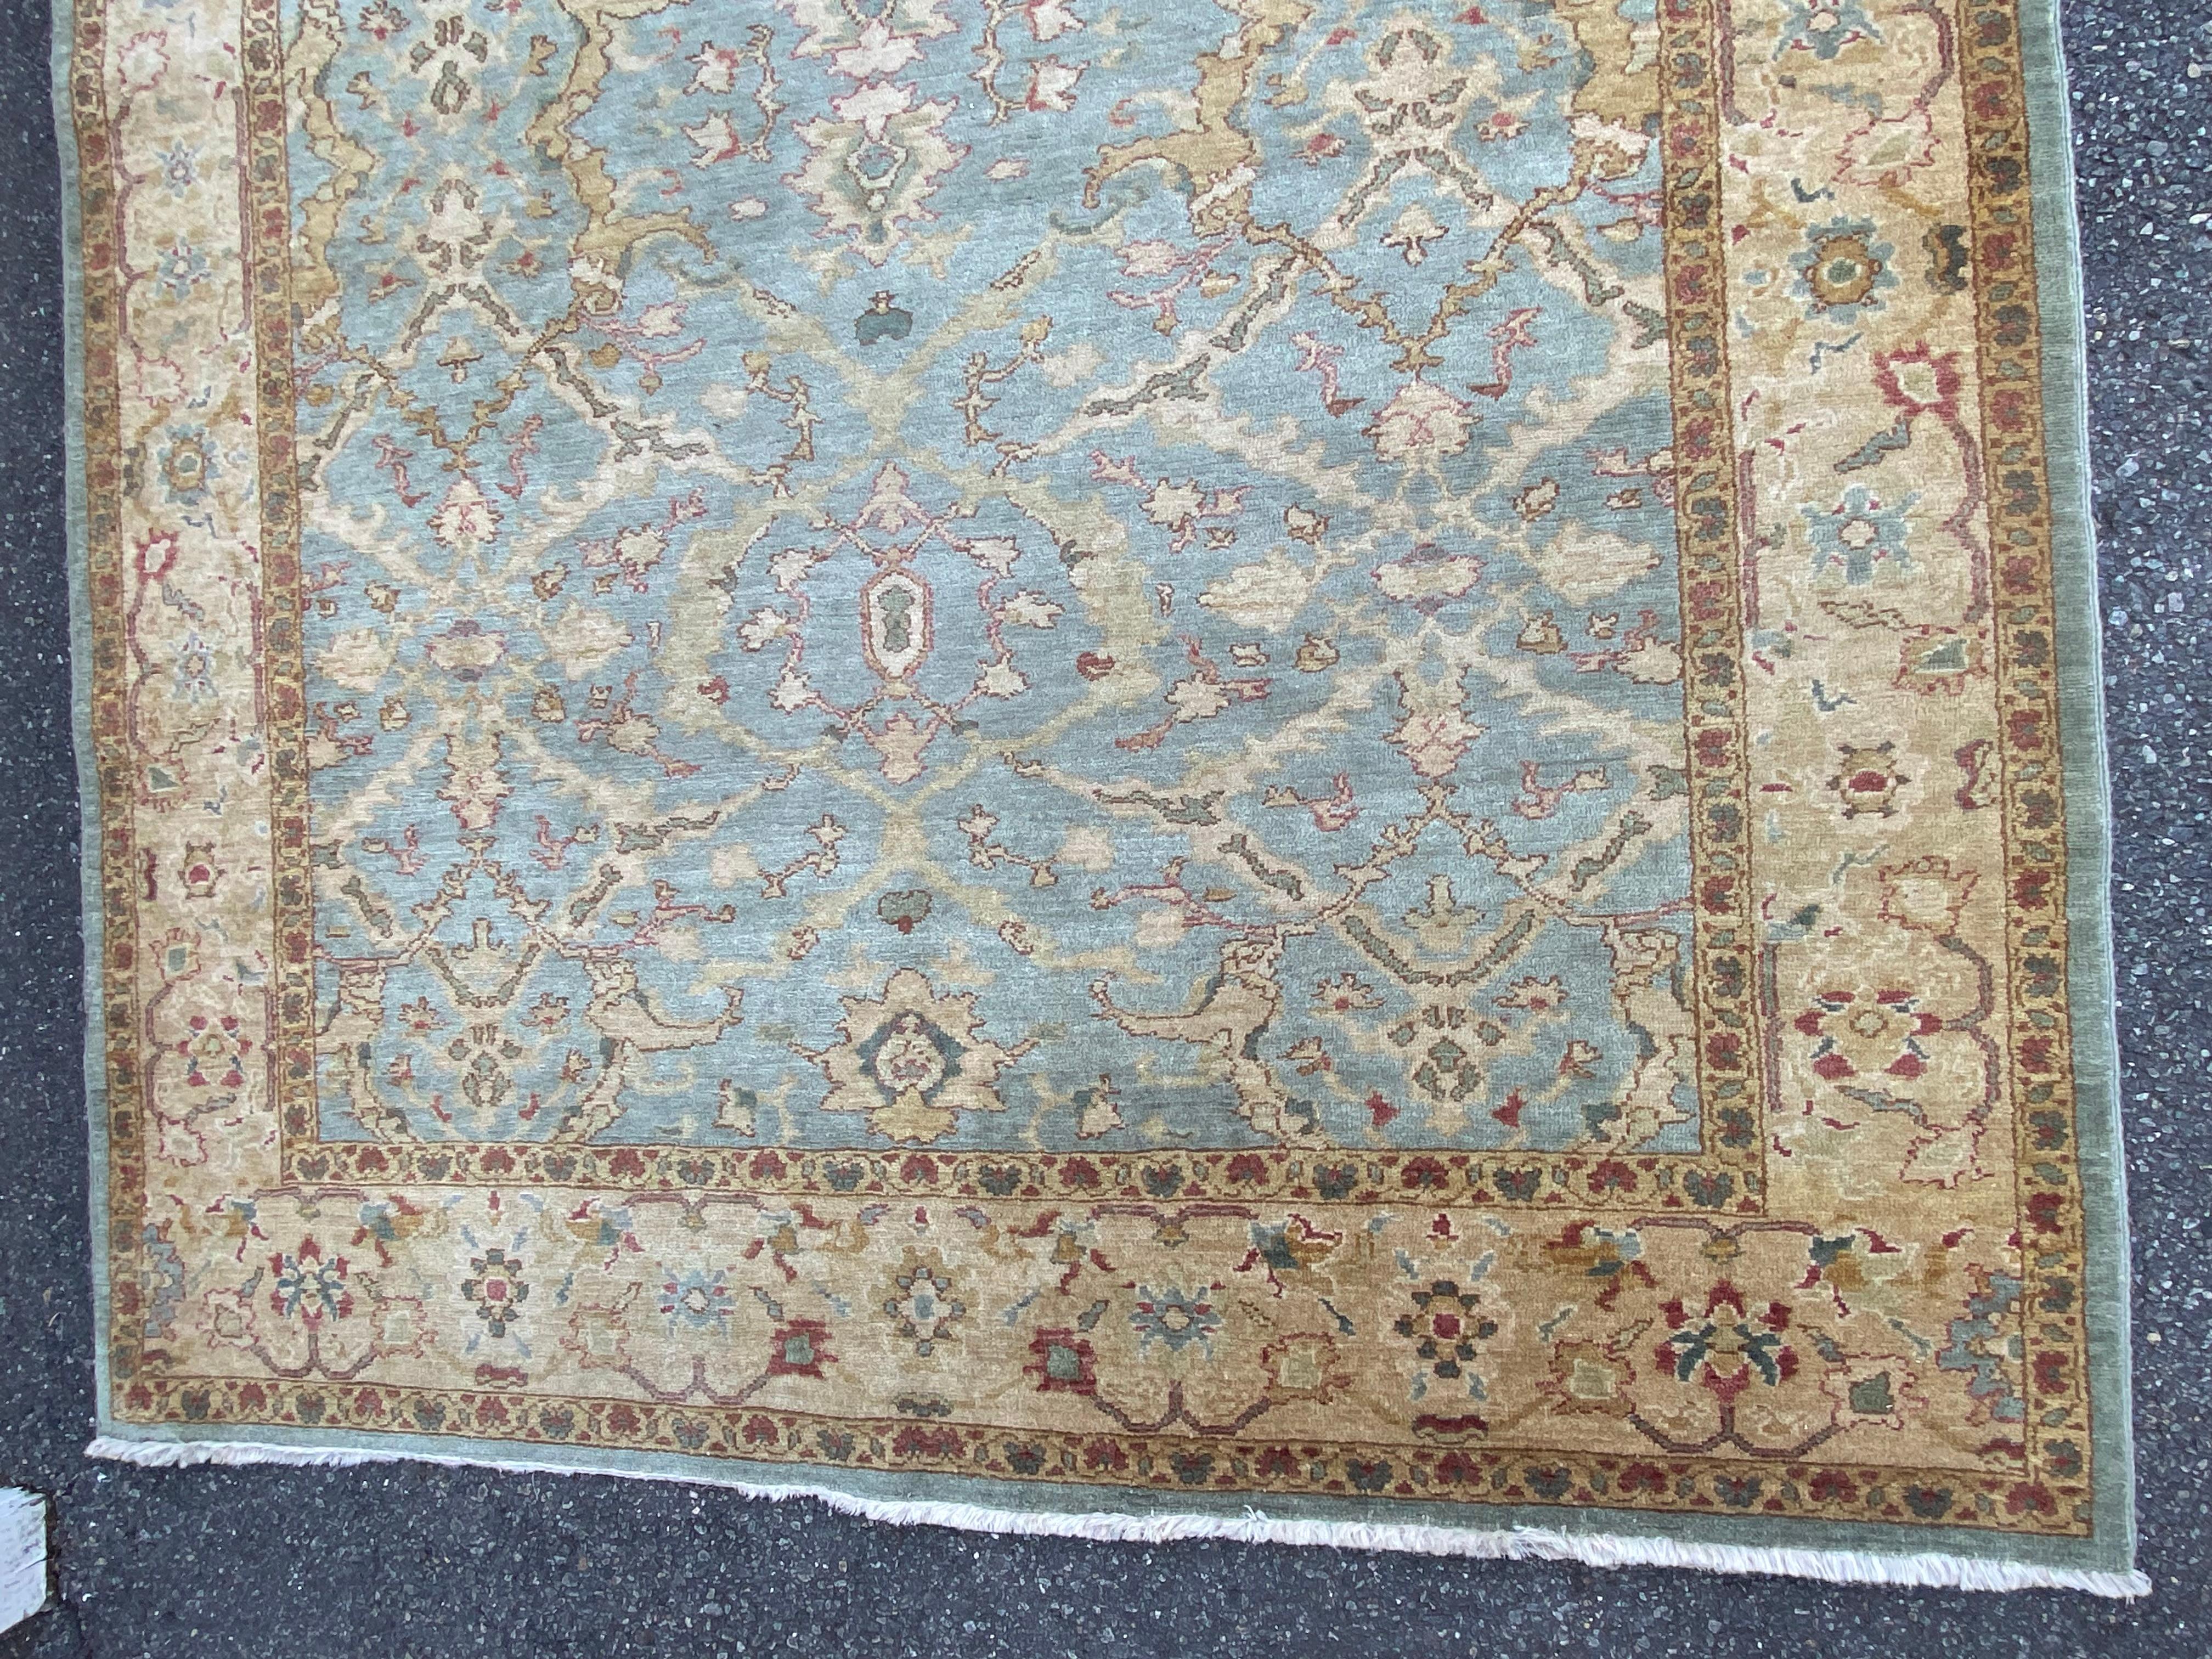 Hand-tufted Sultanabad Persian wool area rug (or wide runner), probably mid-late 20th c. in very good condition, with low, tightly woven pile, and beautiful subdued colors of blue ground, tan boarder, and soft red accents. Pantone colors 15-4703 TPX